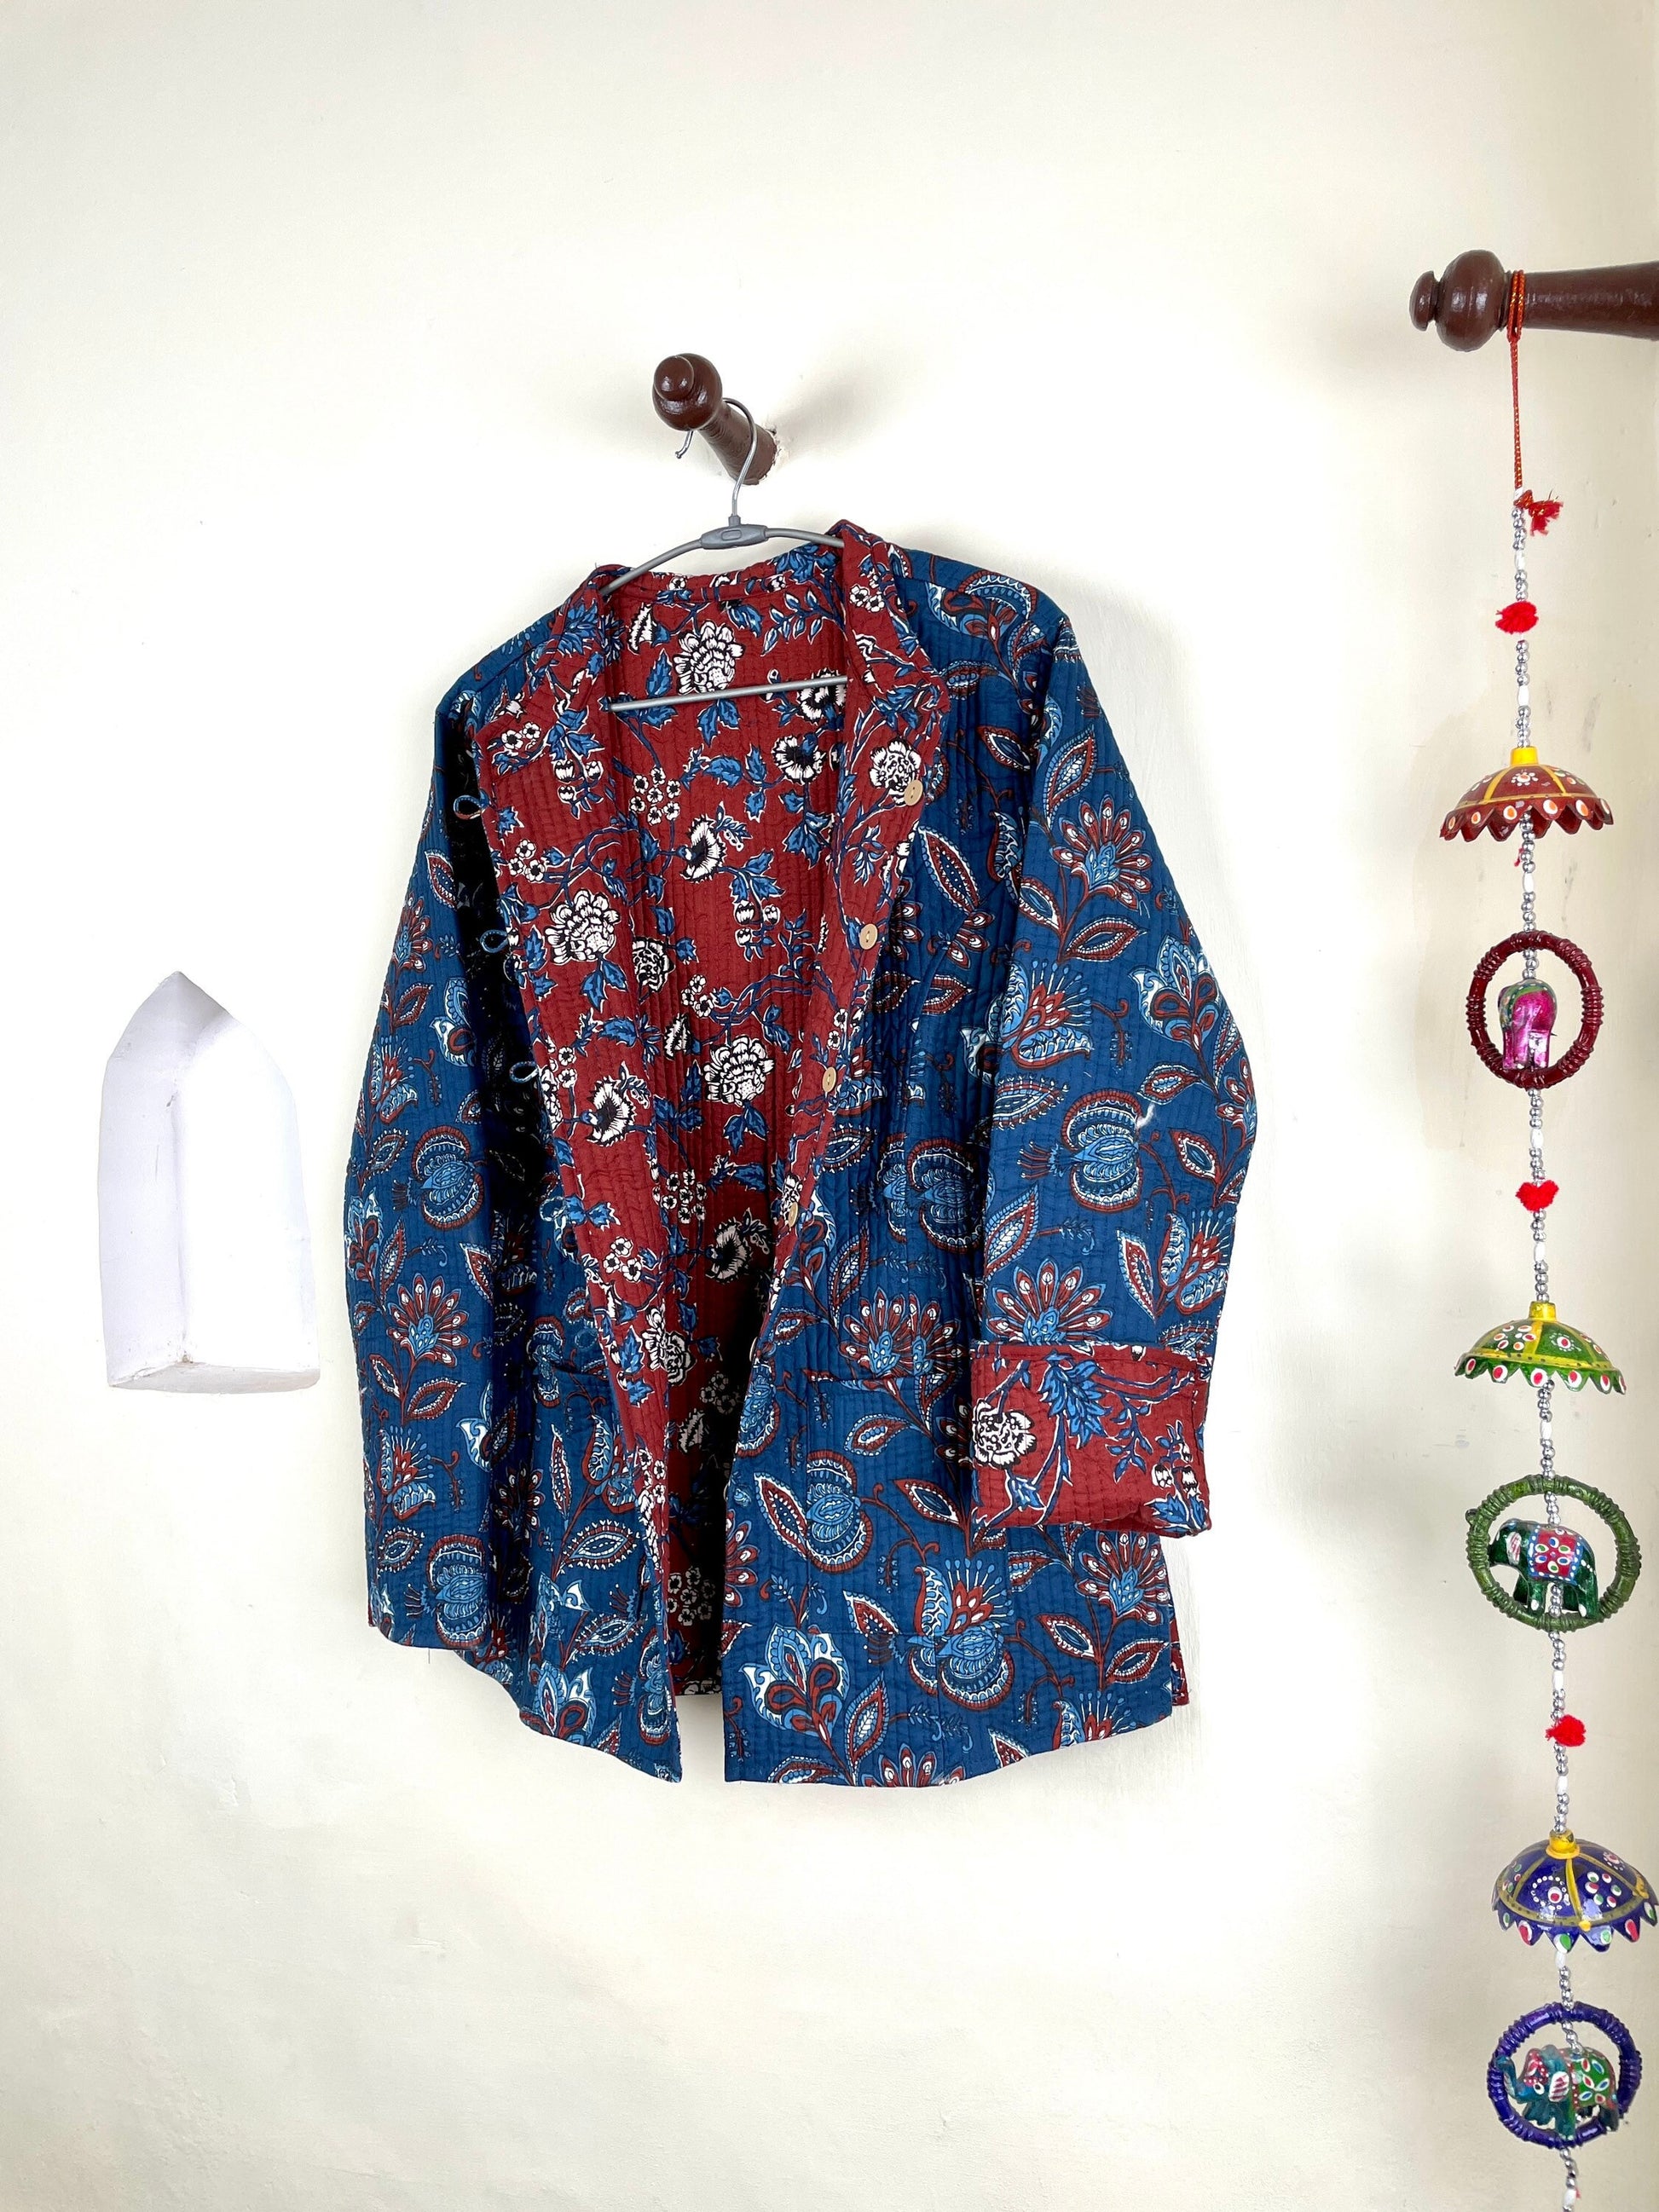 Indian Handmade Quilted Cotton Fabric Jacket Stylish Blue & Red Floral Women's Coat, Reversible Waistcoat for Her